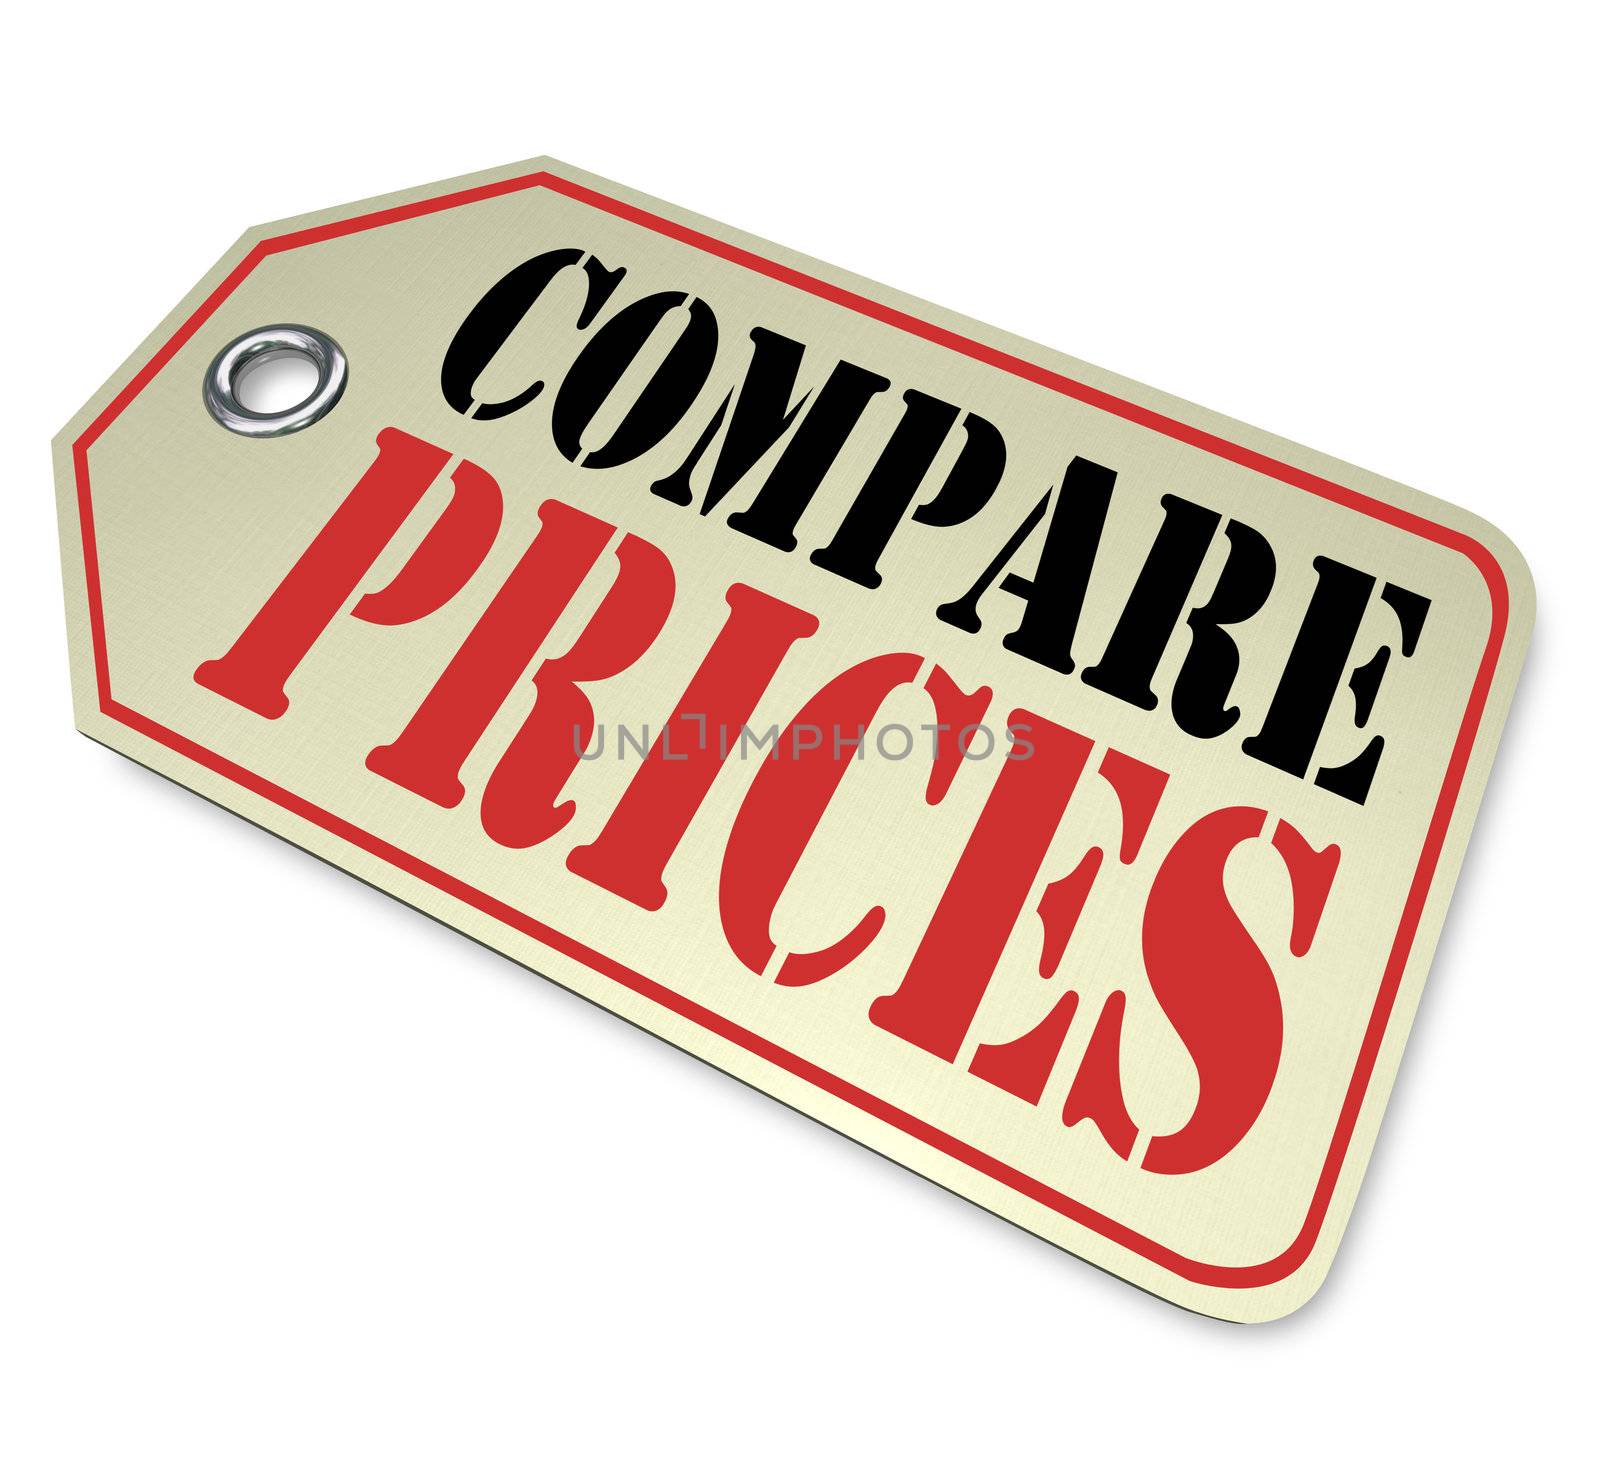 A price tag with the words Compare Prices telling you to do comparison shopping before buying or purchasing merchandise to save money